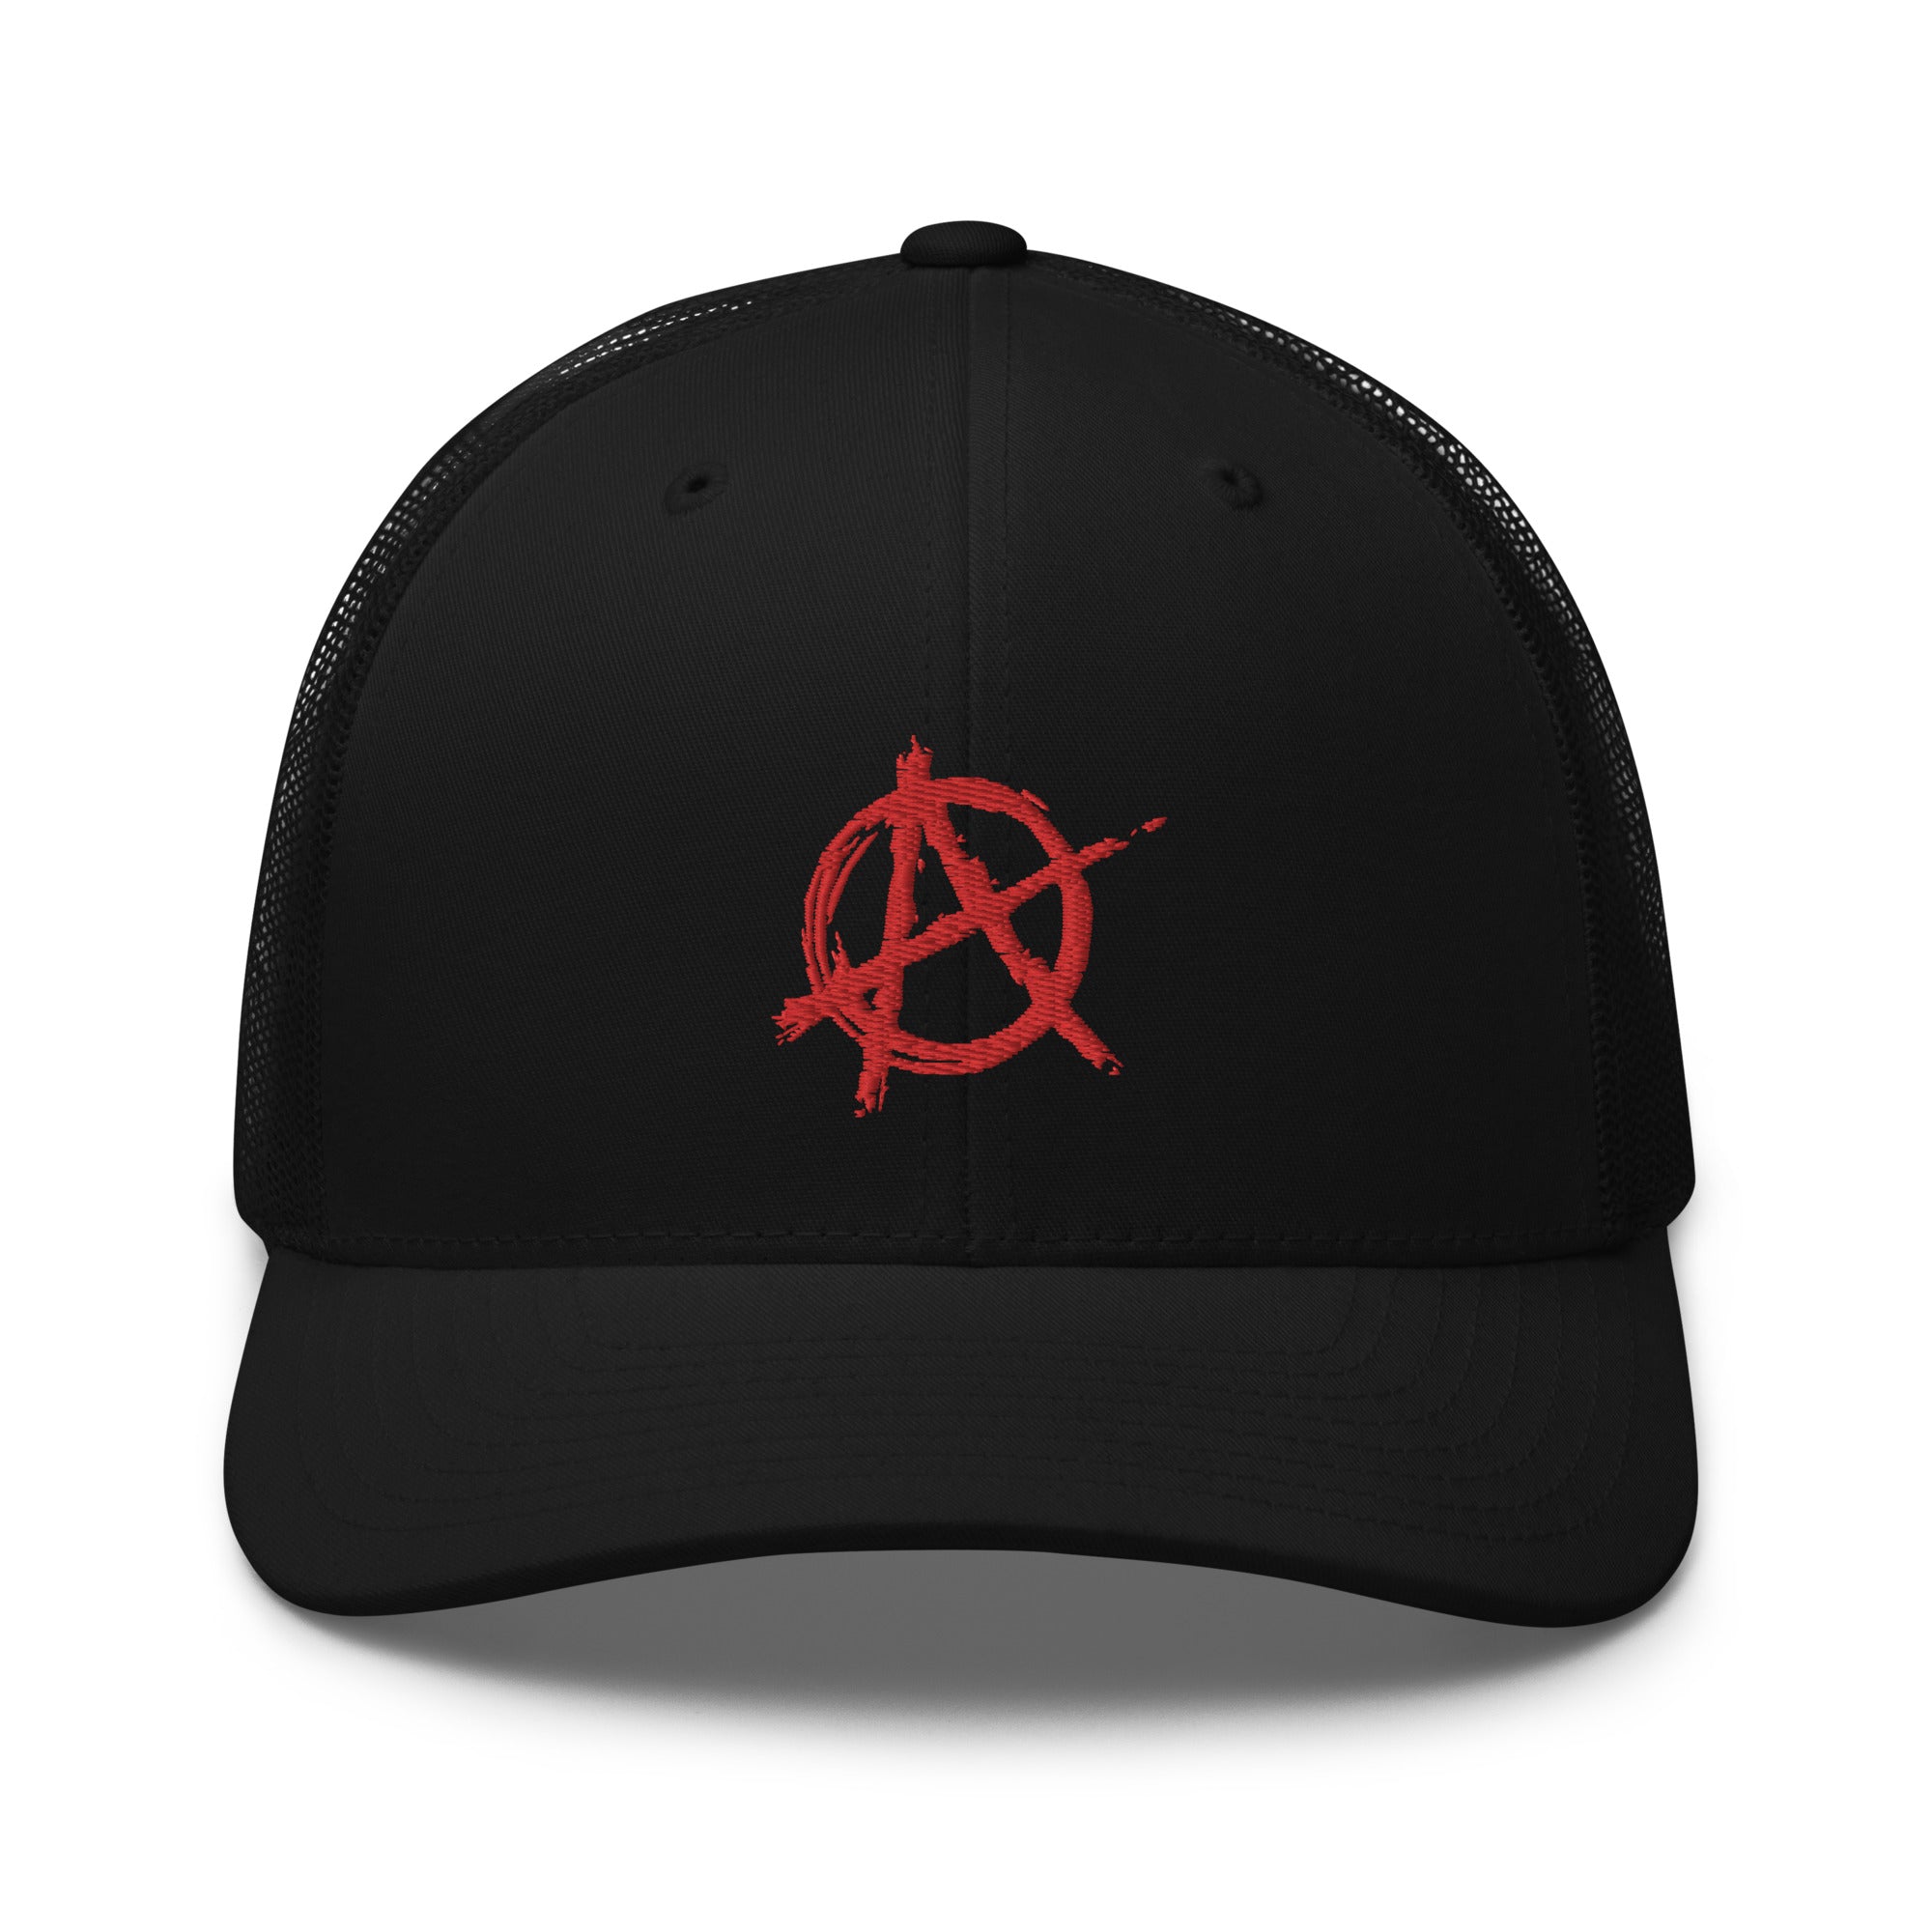 Red Anarchy Sign Punk Rock Chaos Embroidered Retro Trucker Cap Snapback Hat